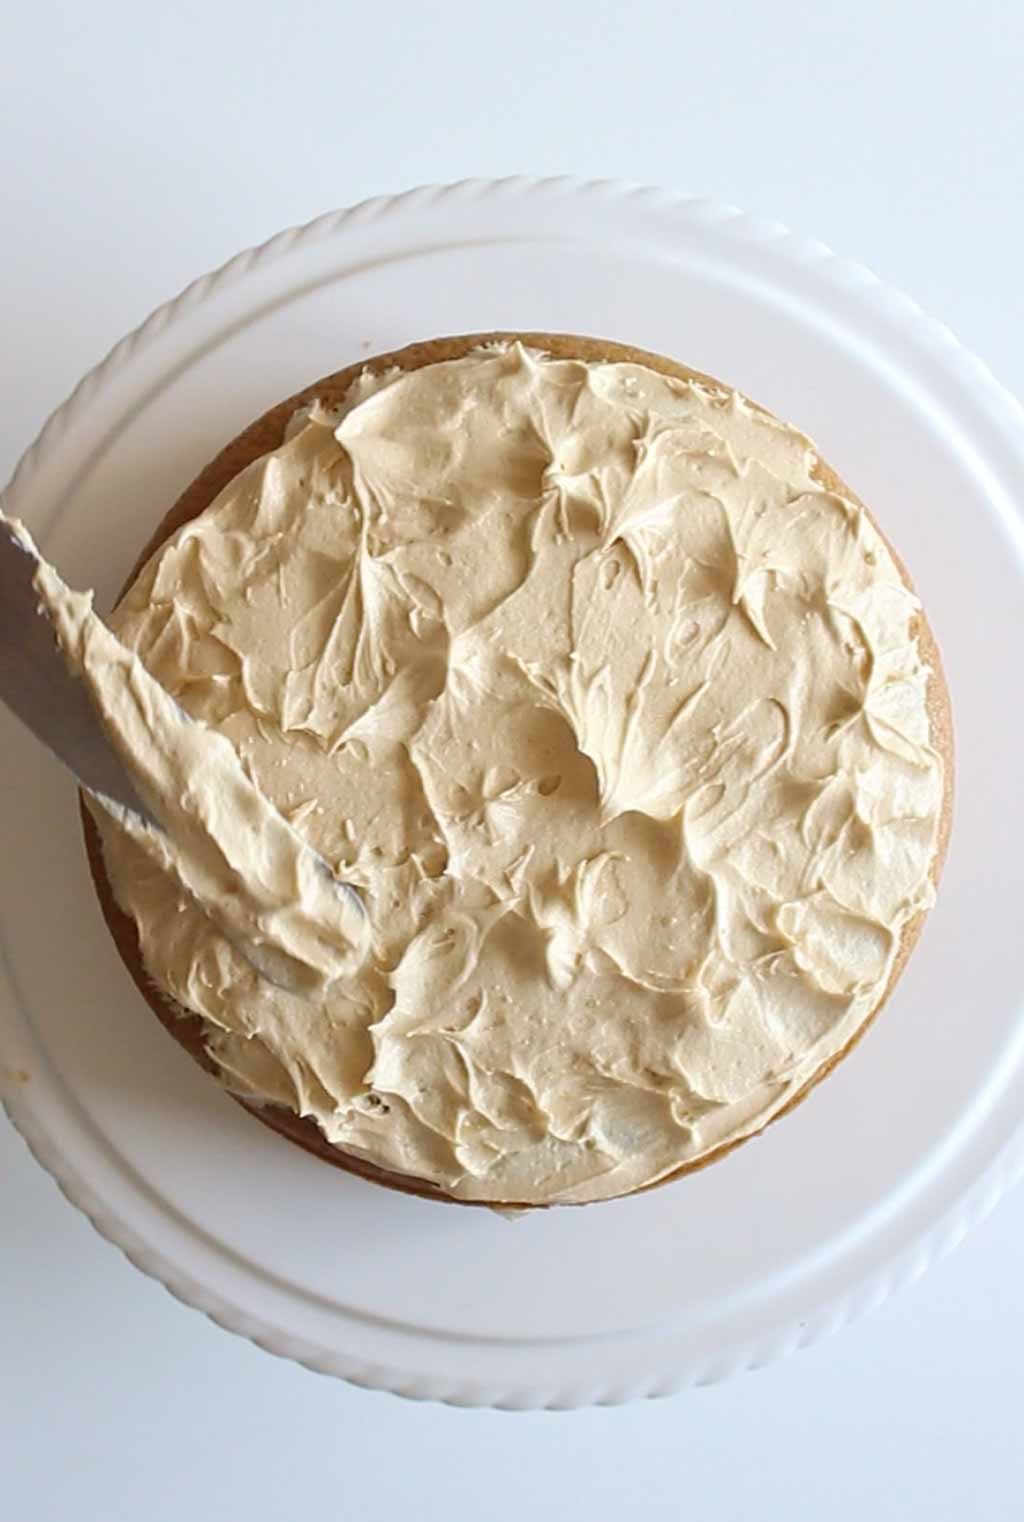 Using a palette knife to create texture on the cake frosting